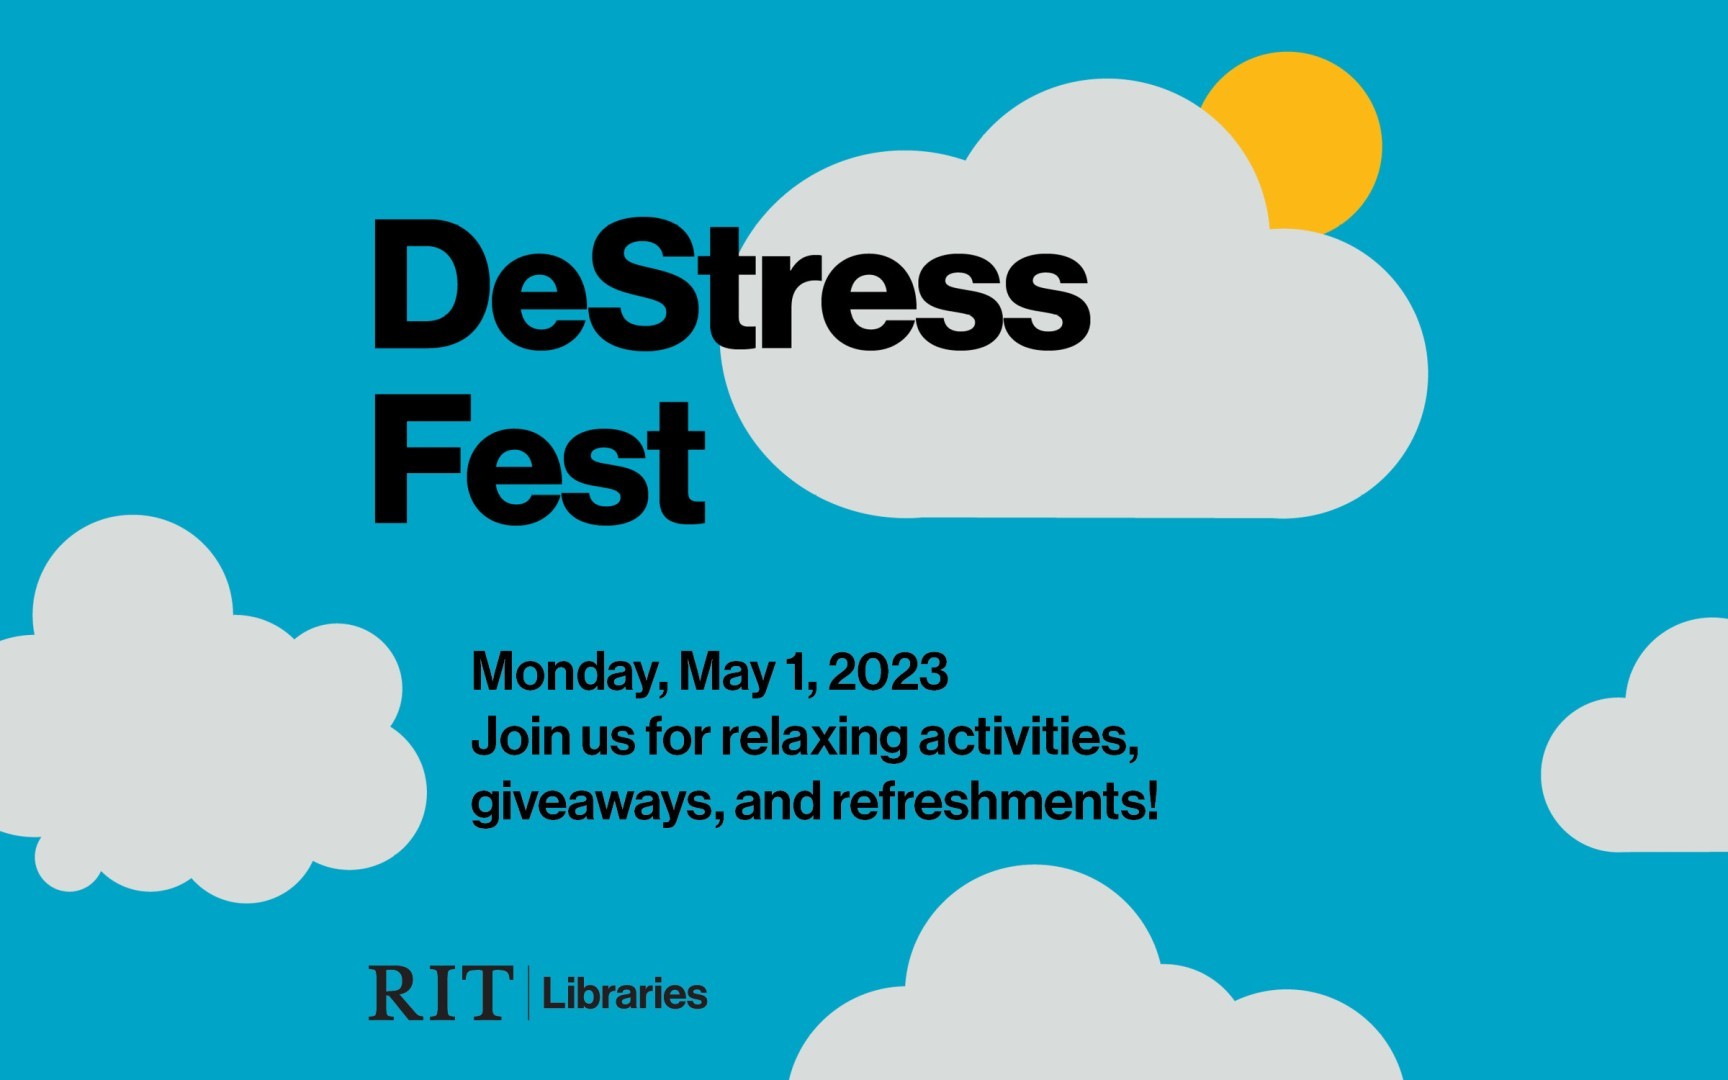 Banner reading DeStress Fest, Monday, May 1, 2023, Join us for relaxing activities, giveaways, and refreshments!